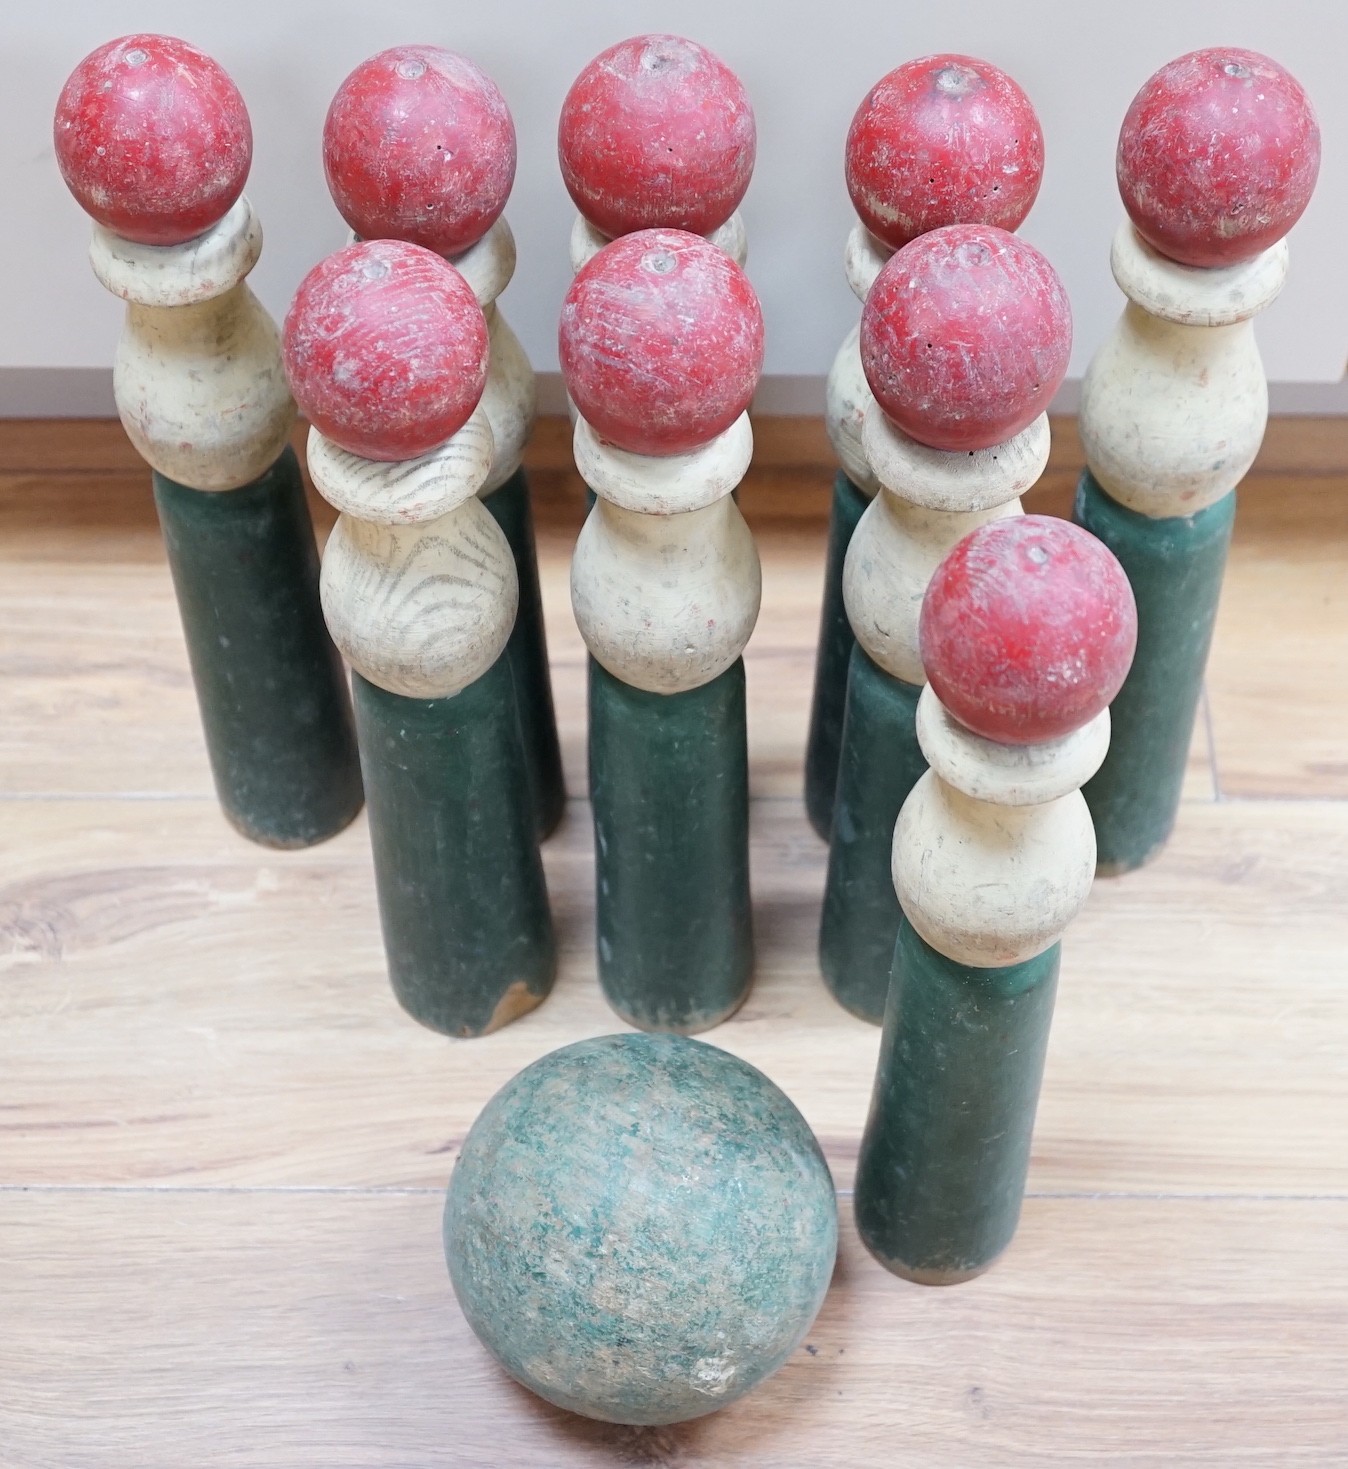 A set of turned wooden skittles and ball